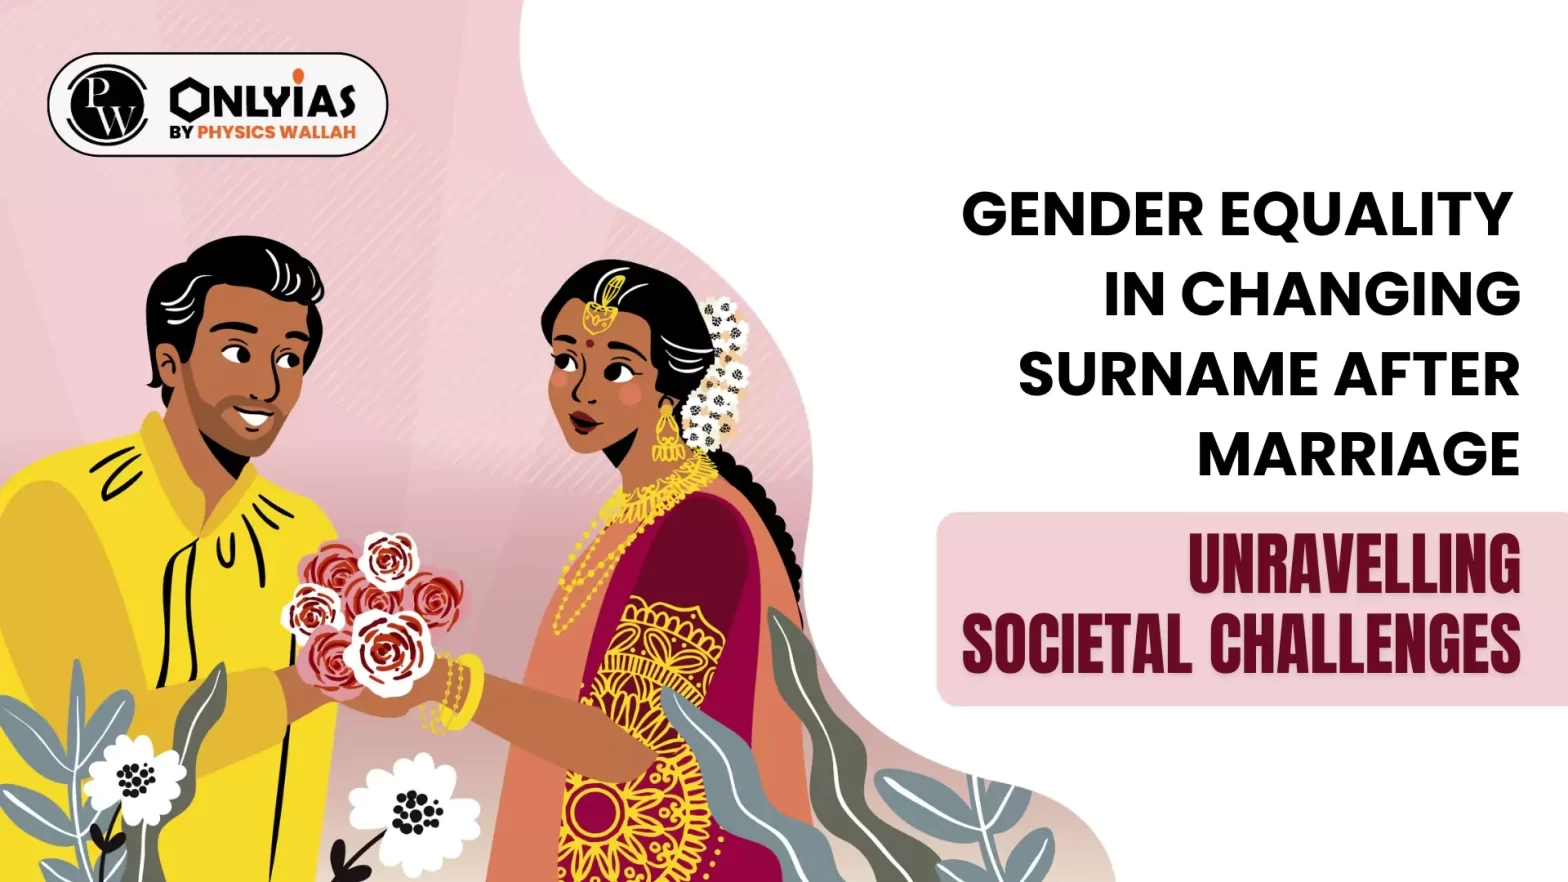 Gender Equality in Changing Surname After Marriage: Unravelling Societal Challenges